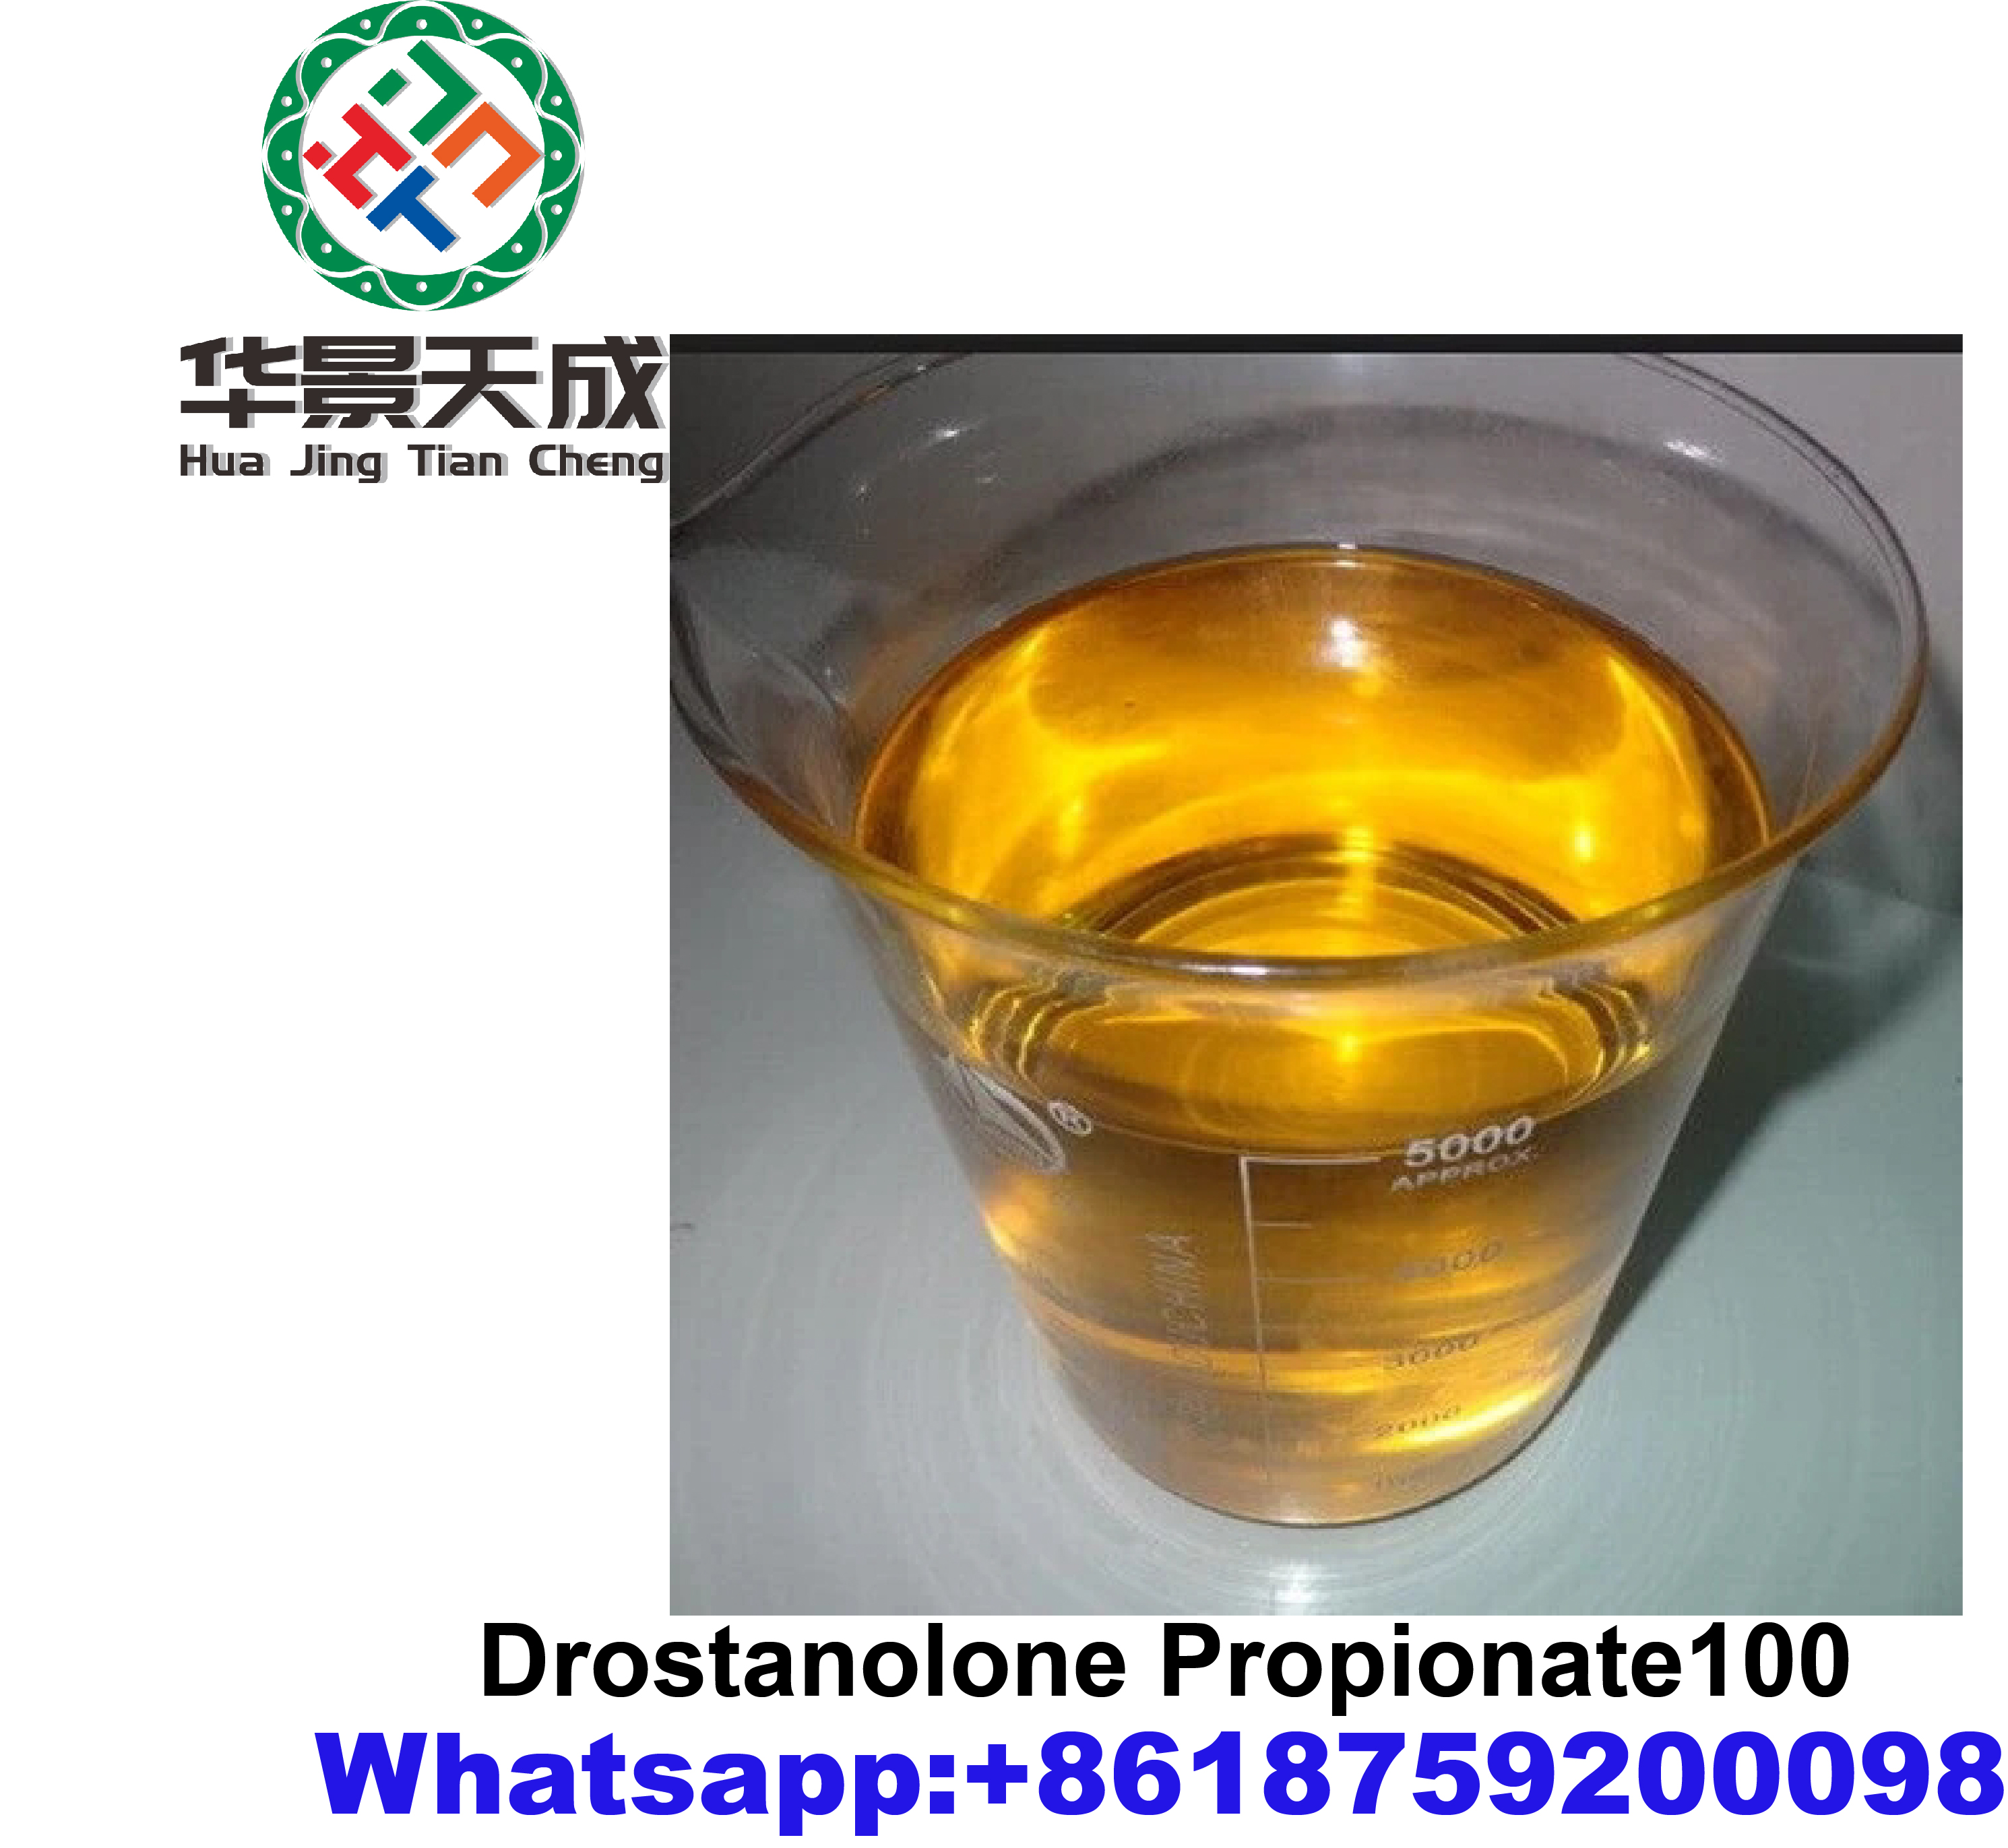 Masteron100 Liquid Anabolic Injection Steroids Drostanolone Propionate 100mg/ml For Bodybuilding Featured Image